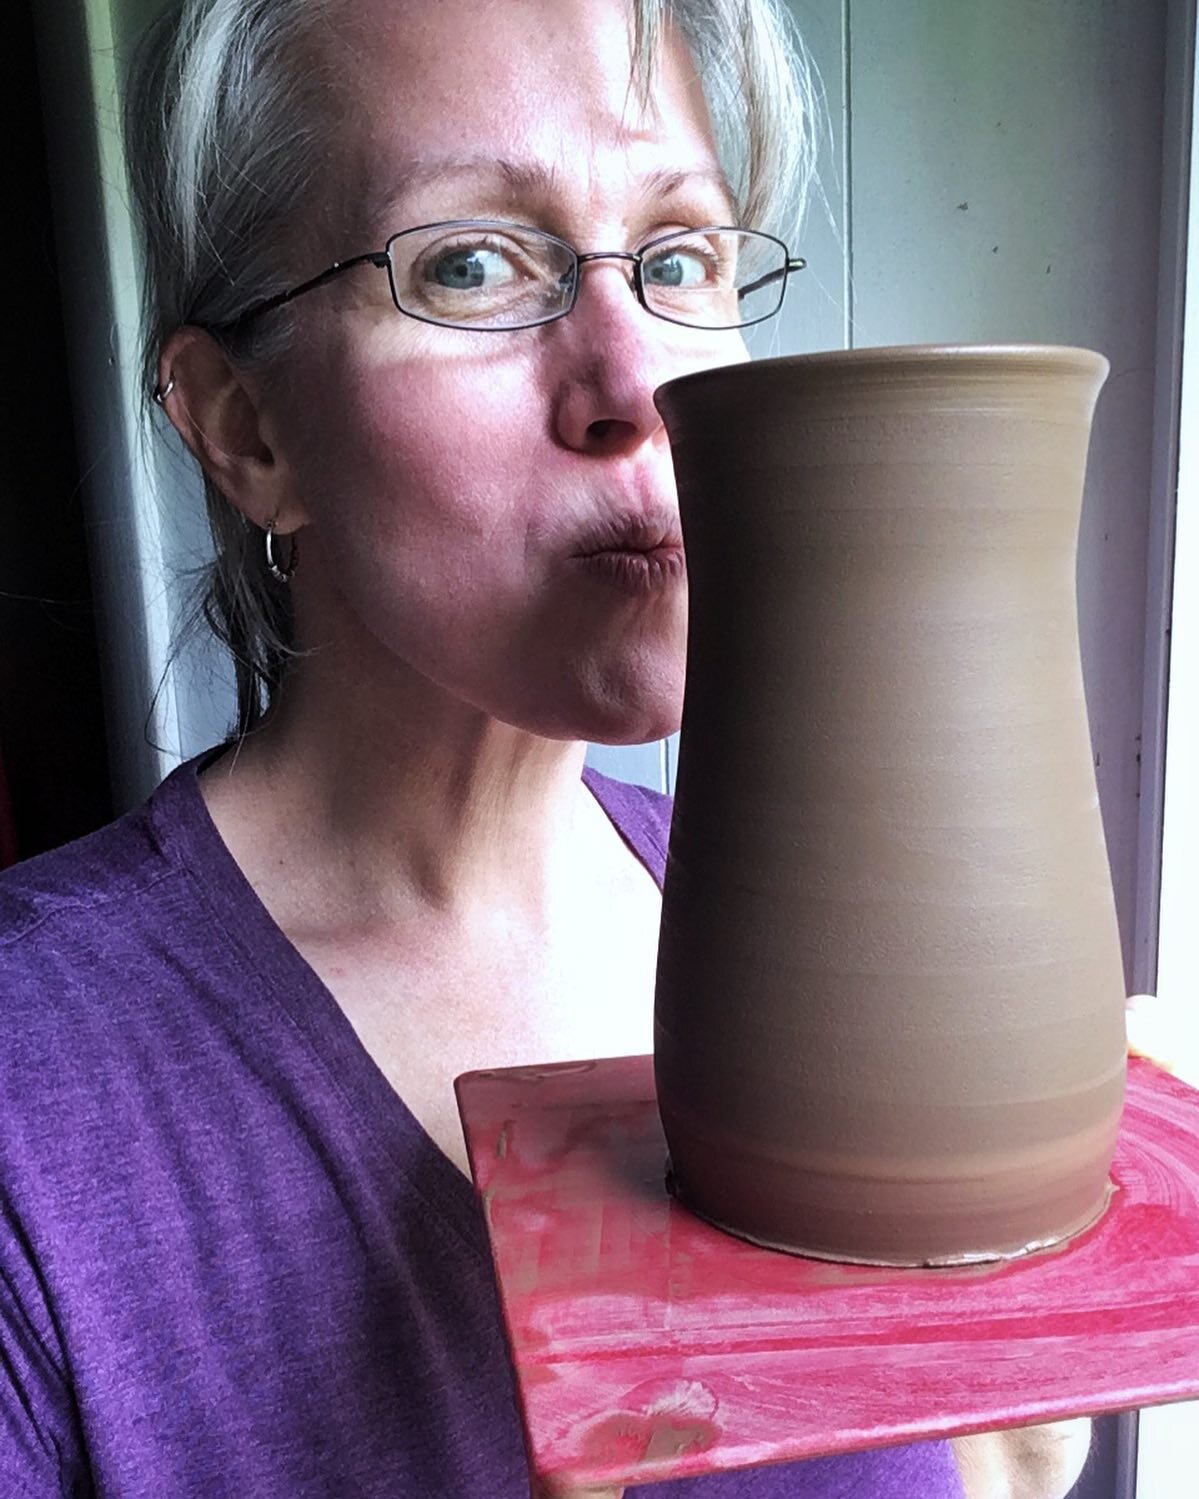 Hello, friends! I&rsquo;m Jen, maker of all the things. For new and longtime followers (thank you, by the way! I&rsquo;m so glad you&rsquo;re here) here are five things about me:

1. I love this new mug shape so much I want to kiss it. 😘😂 No joke, 